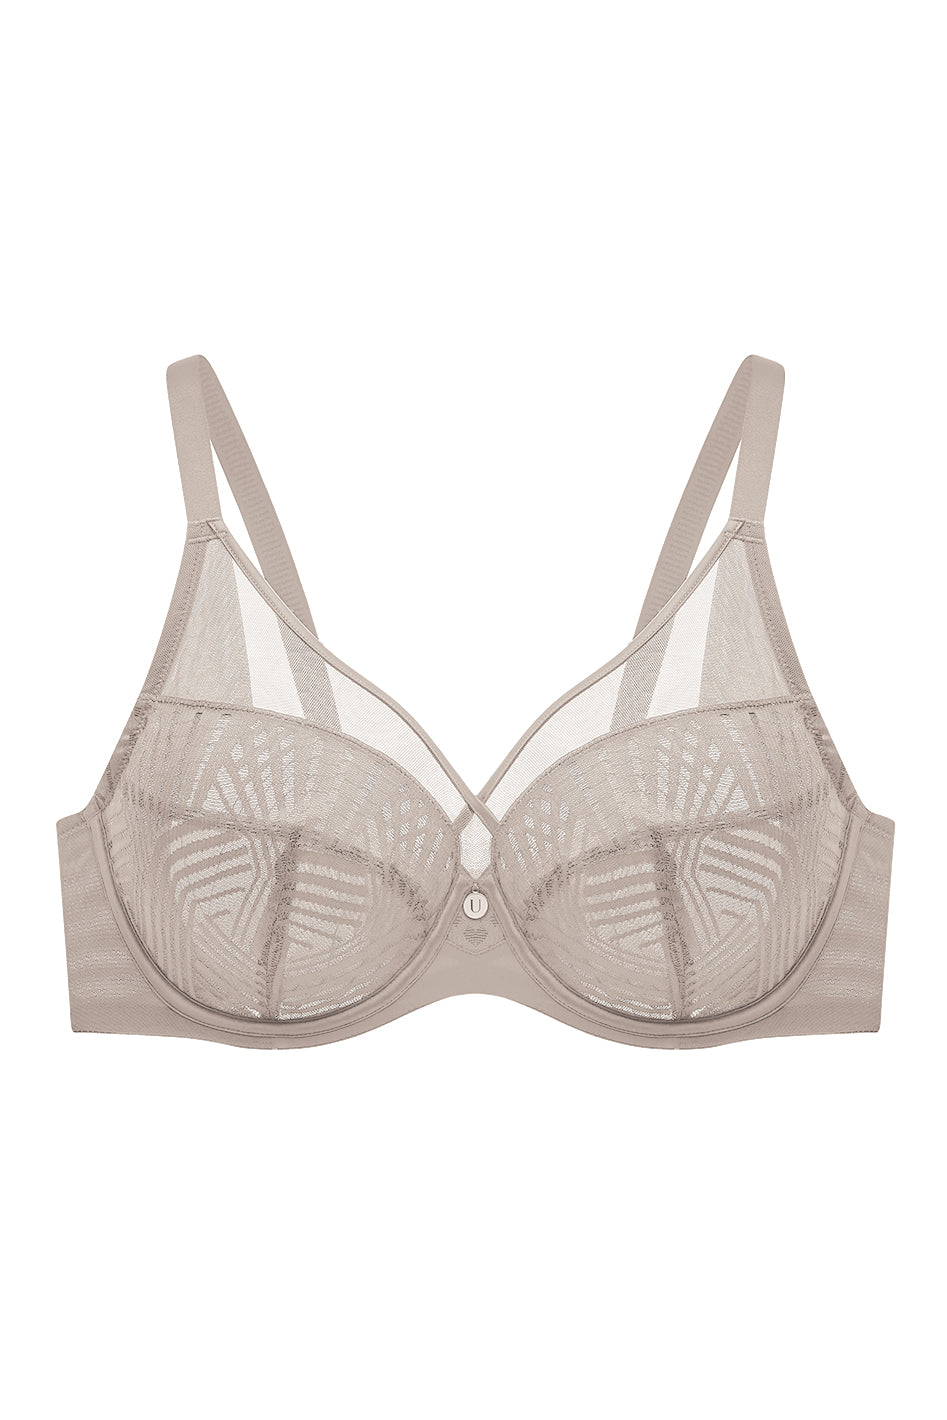 Buy Bra Seamless Bra Plus Size 50C D E Cup Push Up Bra Brassiere Side  Adjustment Underwear 85 90 95 100 105 110 115E Size Beige Cup Size D Bands  Size 34 75 at